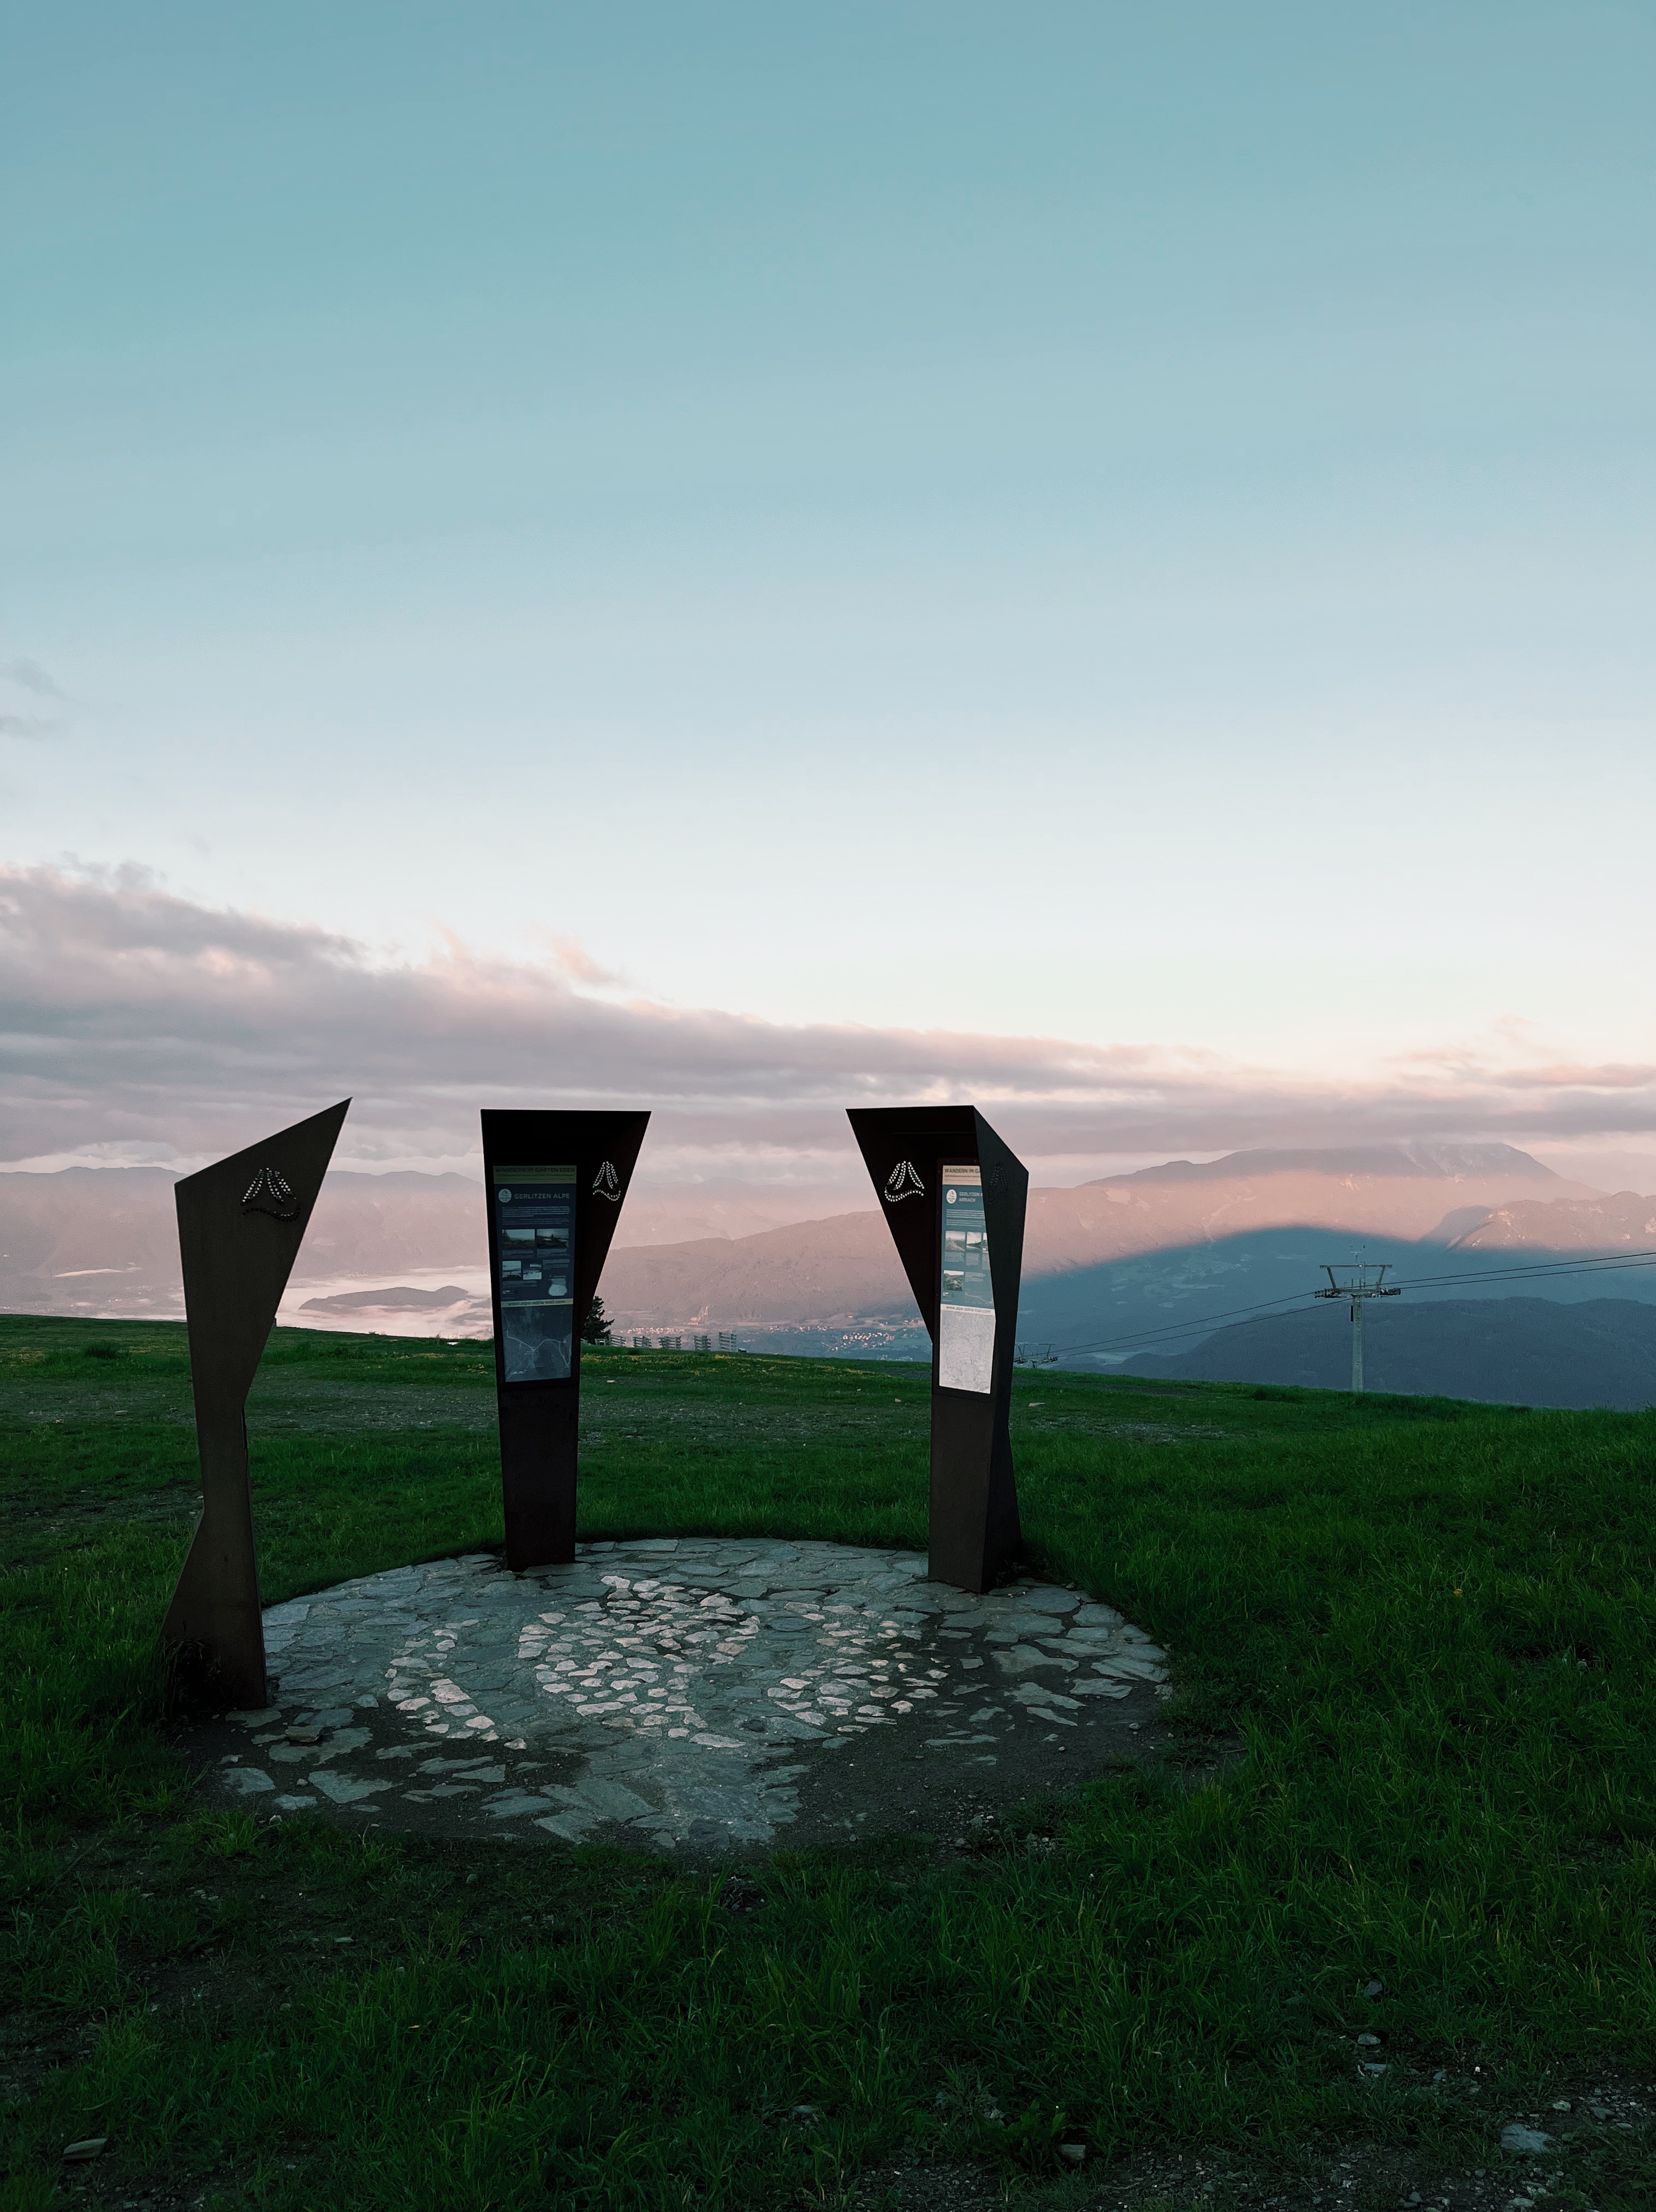 Three statues at dawn  on the Alpe Adria Trail, a long-distance hiking trail in Europe